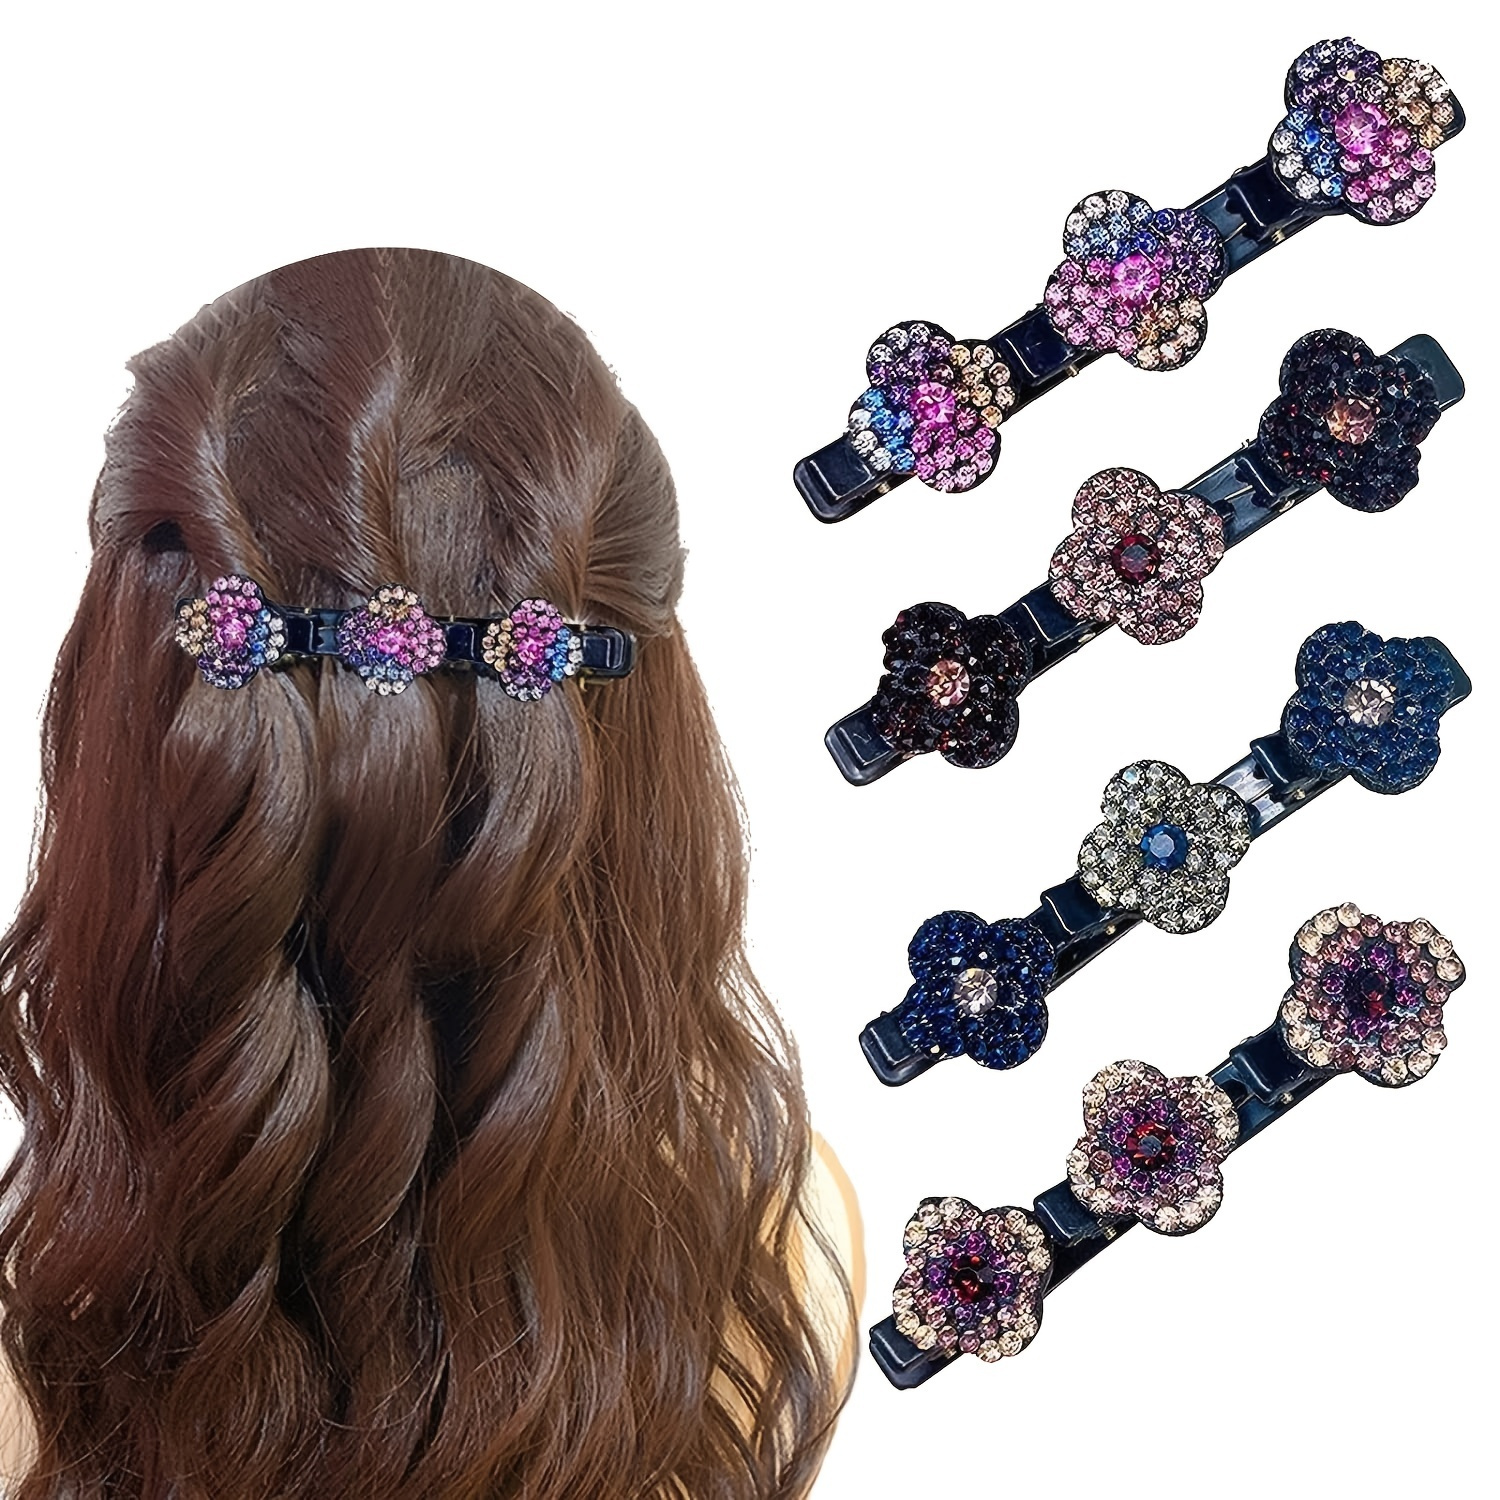 

Sparkling Crystal Stone Braided Hair Clips, Four-leaf Clover Chopped Hairpin Duckbill Clip With 3 Small Clips, Braided Hair Clip With Rhinestones For Women/girls